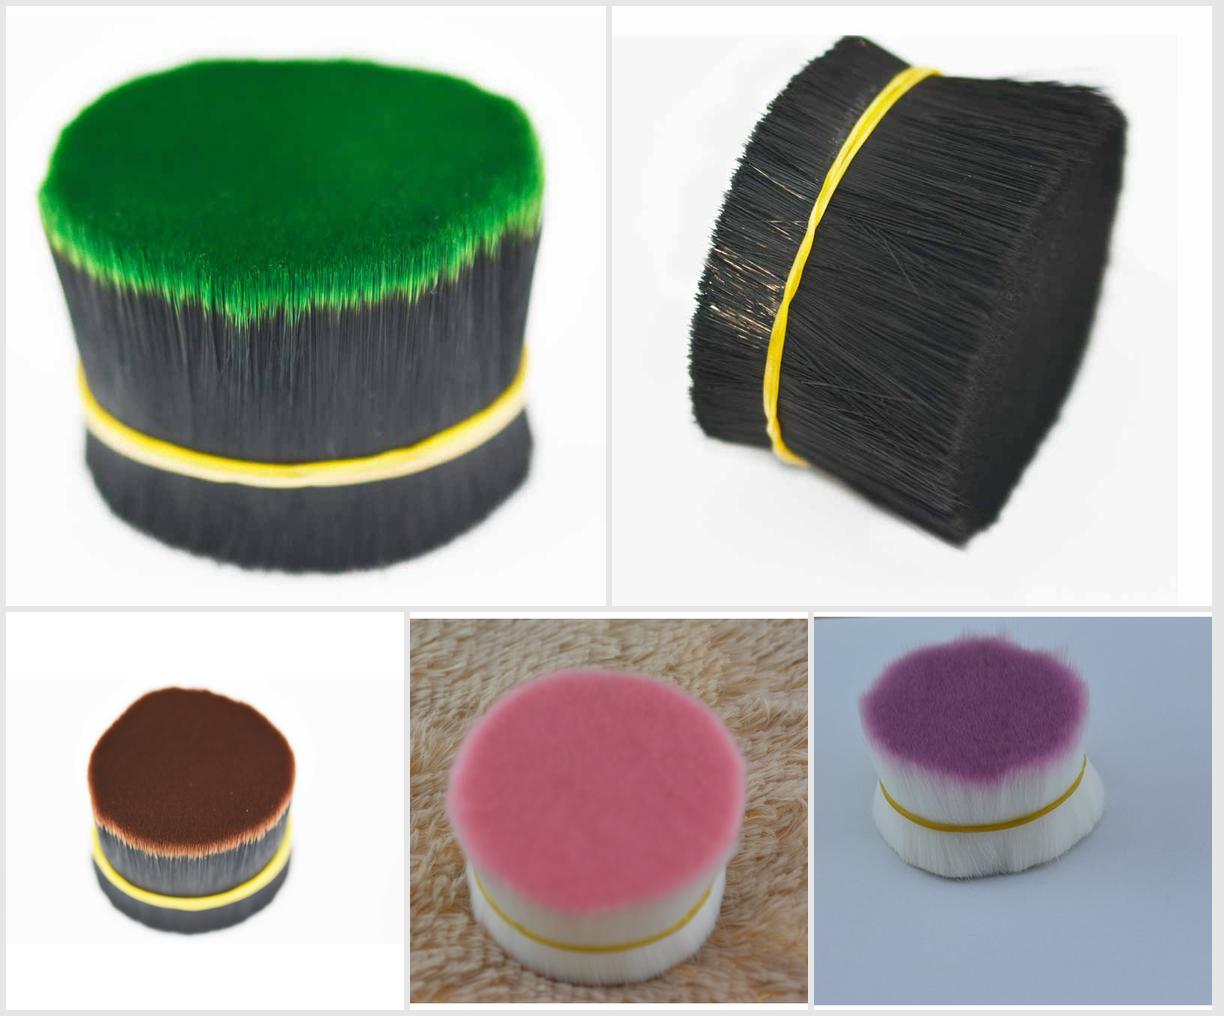 Soft Tapered Synthetic PBT/Brush Fibers: For Natural and Glamorous False Eyelashes